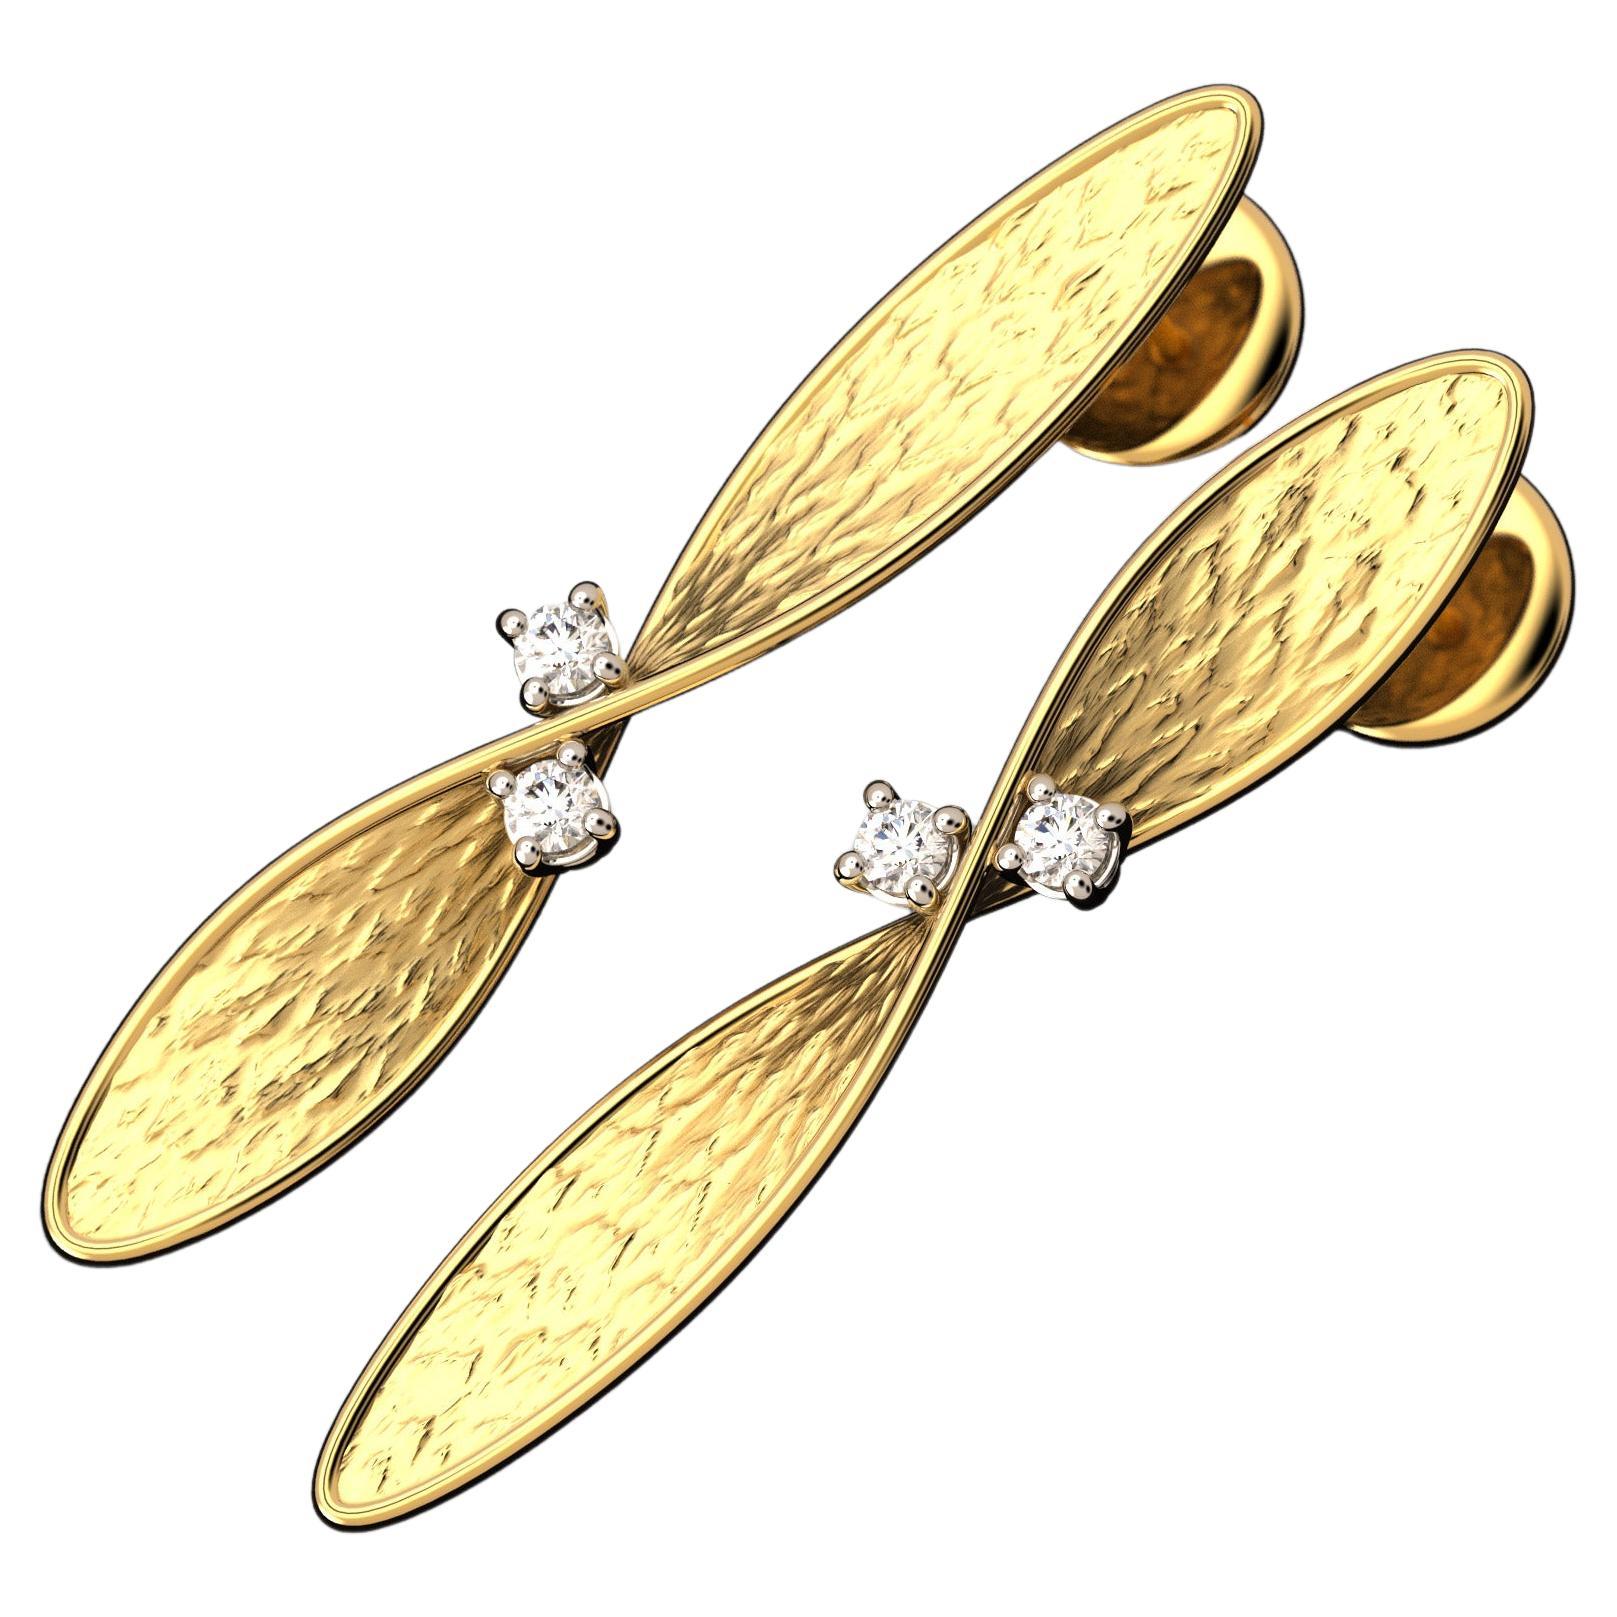 Oltremare Gioielli, Italian Jewelry, 14k Gold Diamond Earrings Made in Italy For Sale